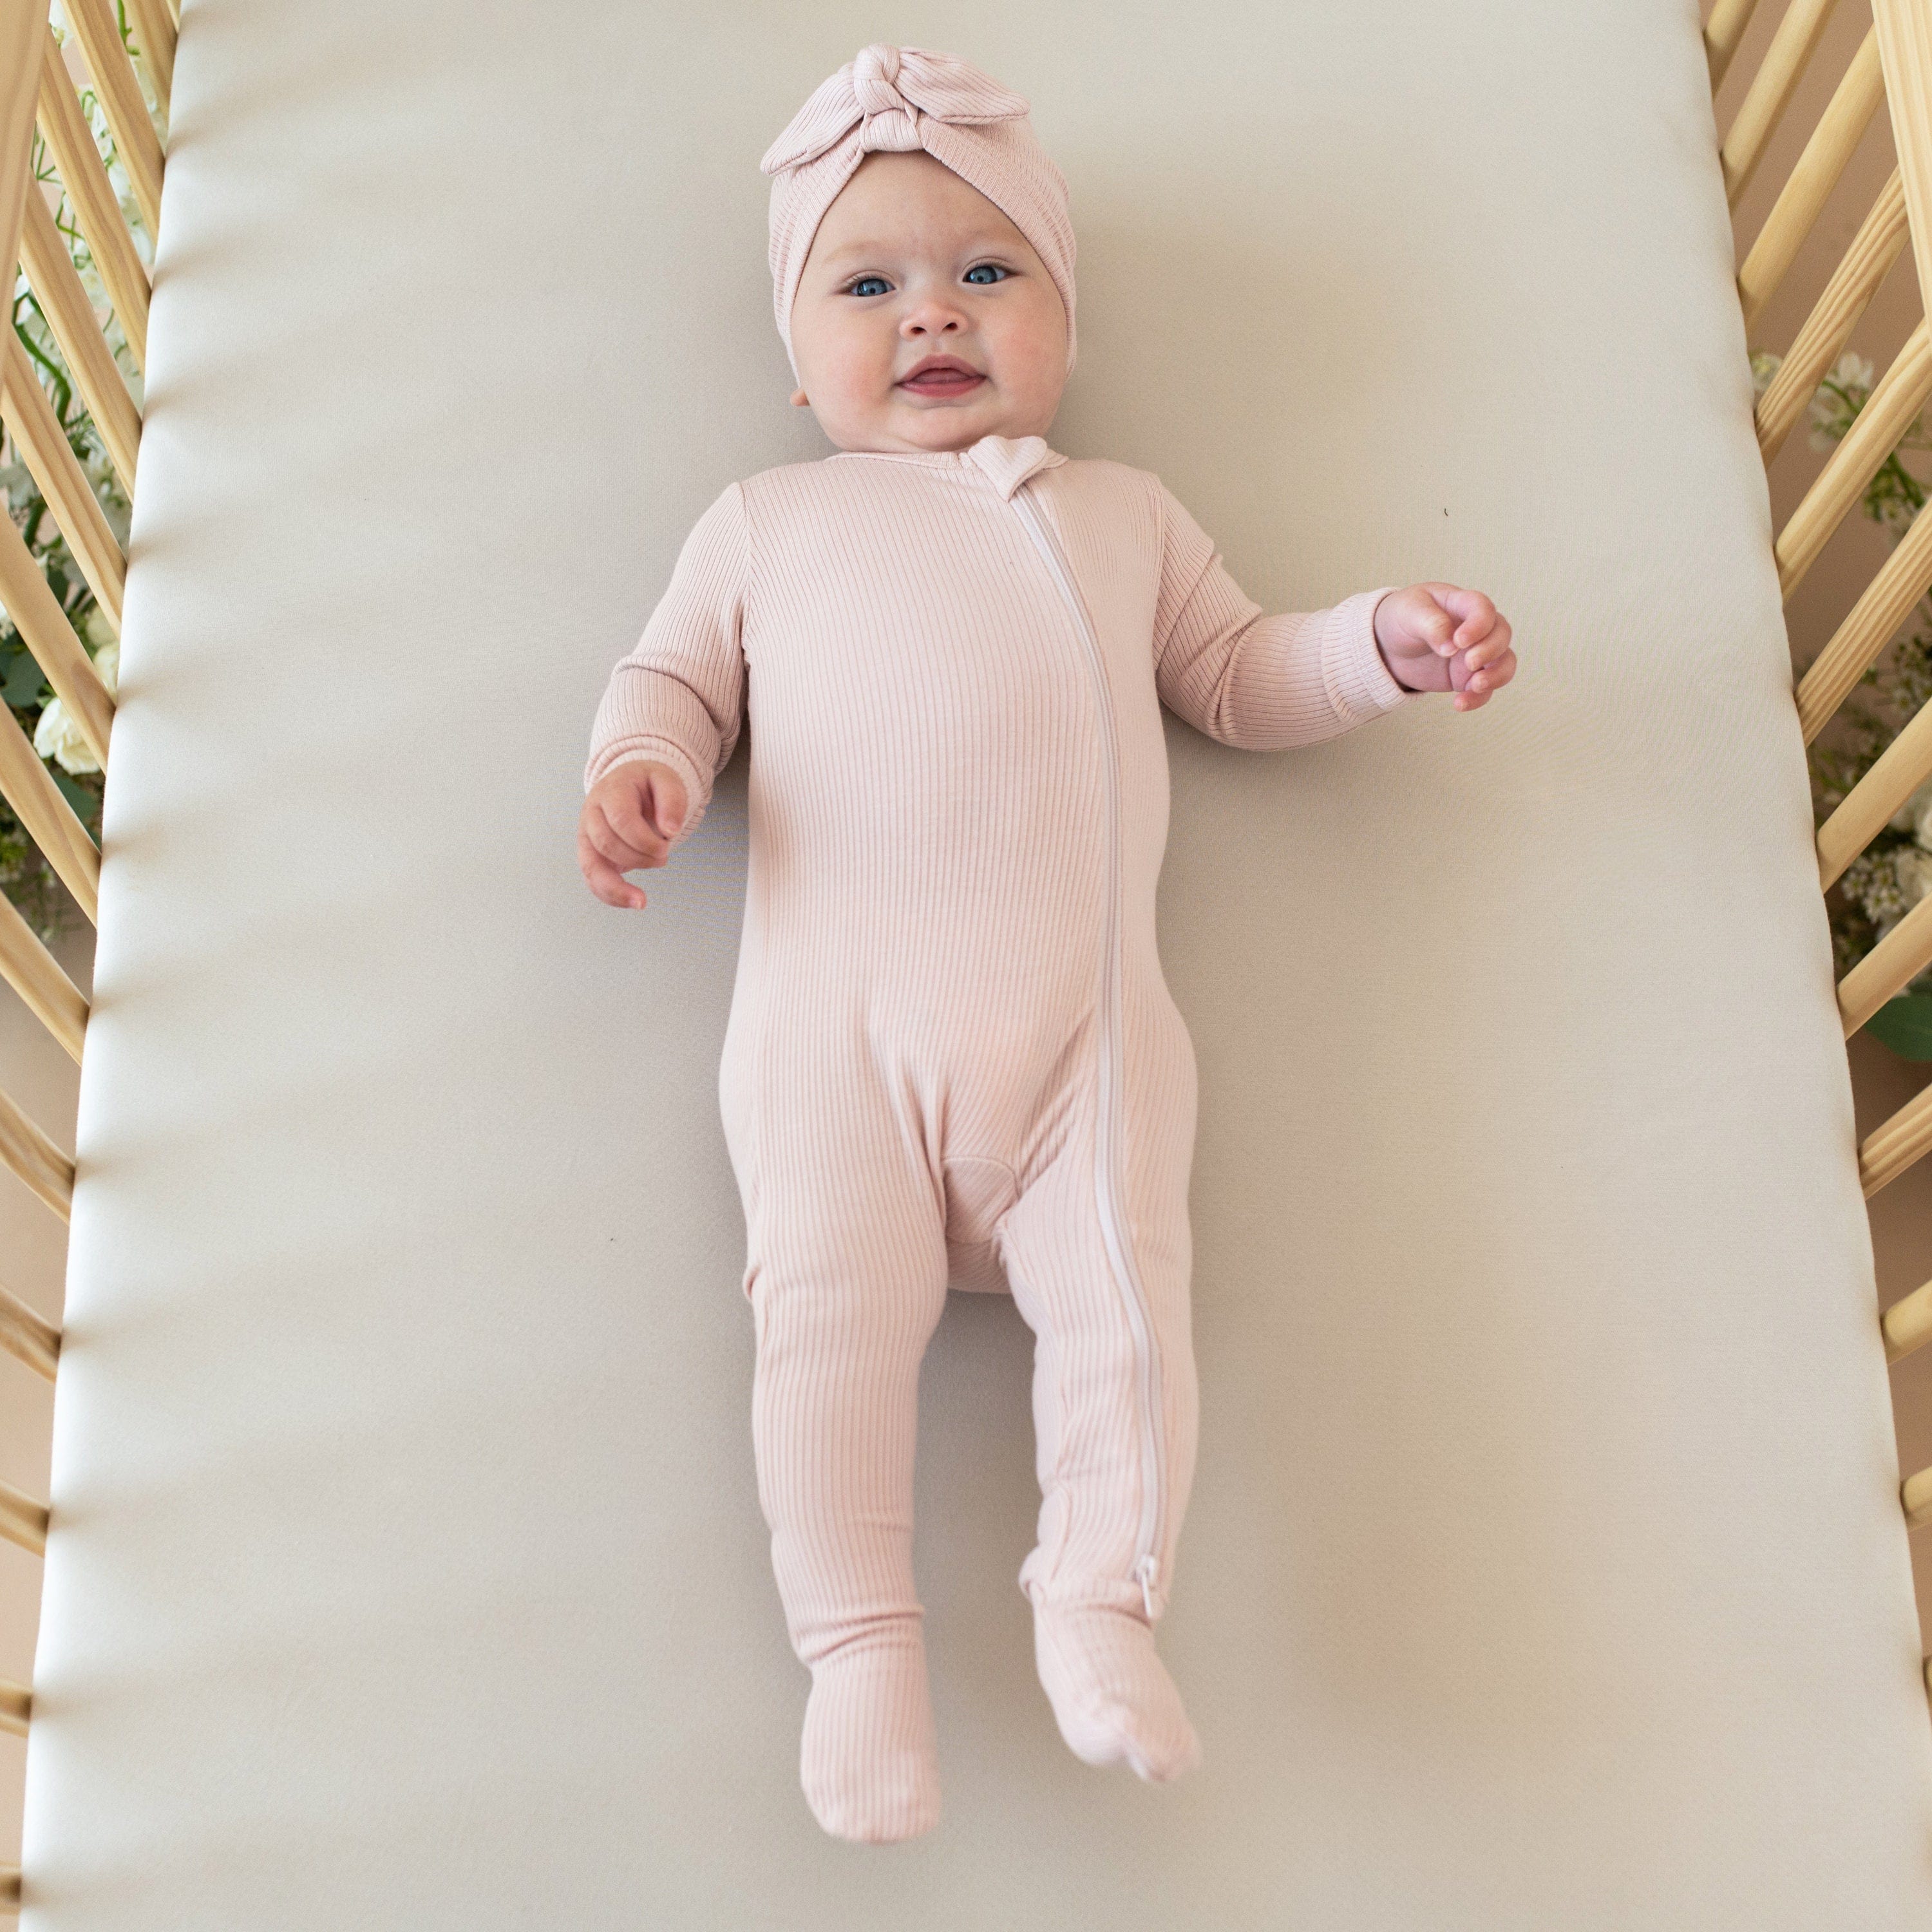 Baby wearing Kyte Baby Ribbed Zippered Footie in Blush